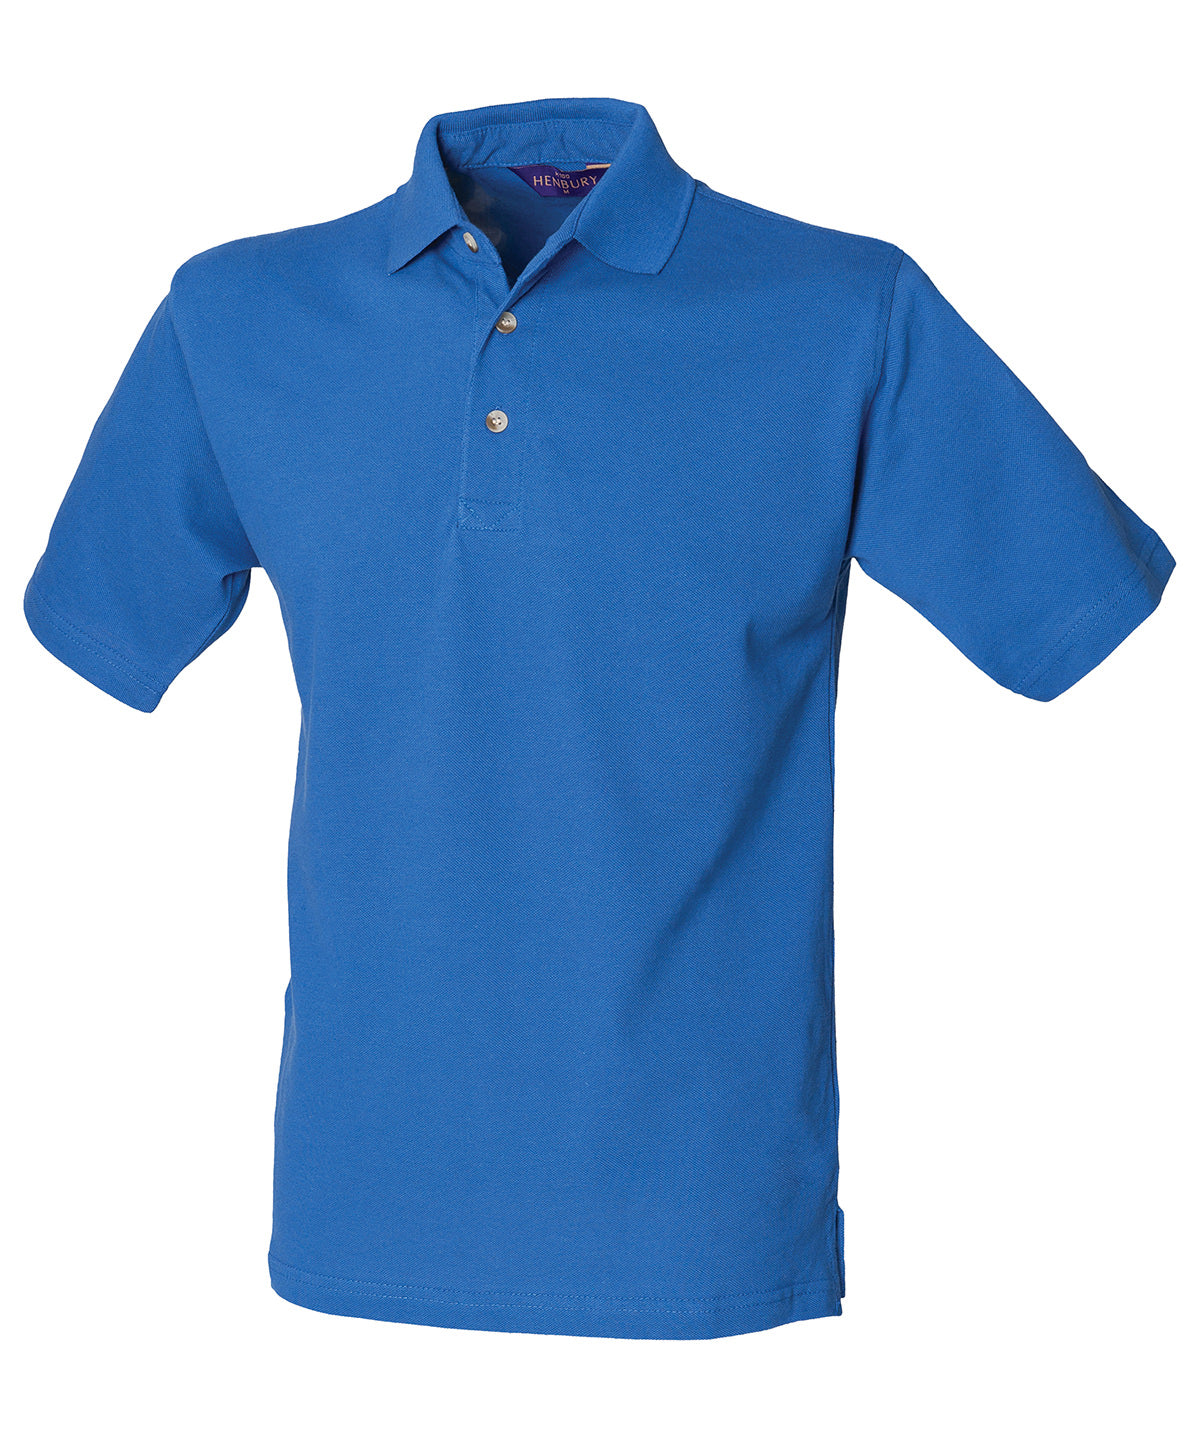 Personalised Polo Shirts - Black Henbury Classic cotton piqué polo with stand-up collar